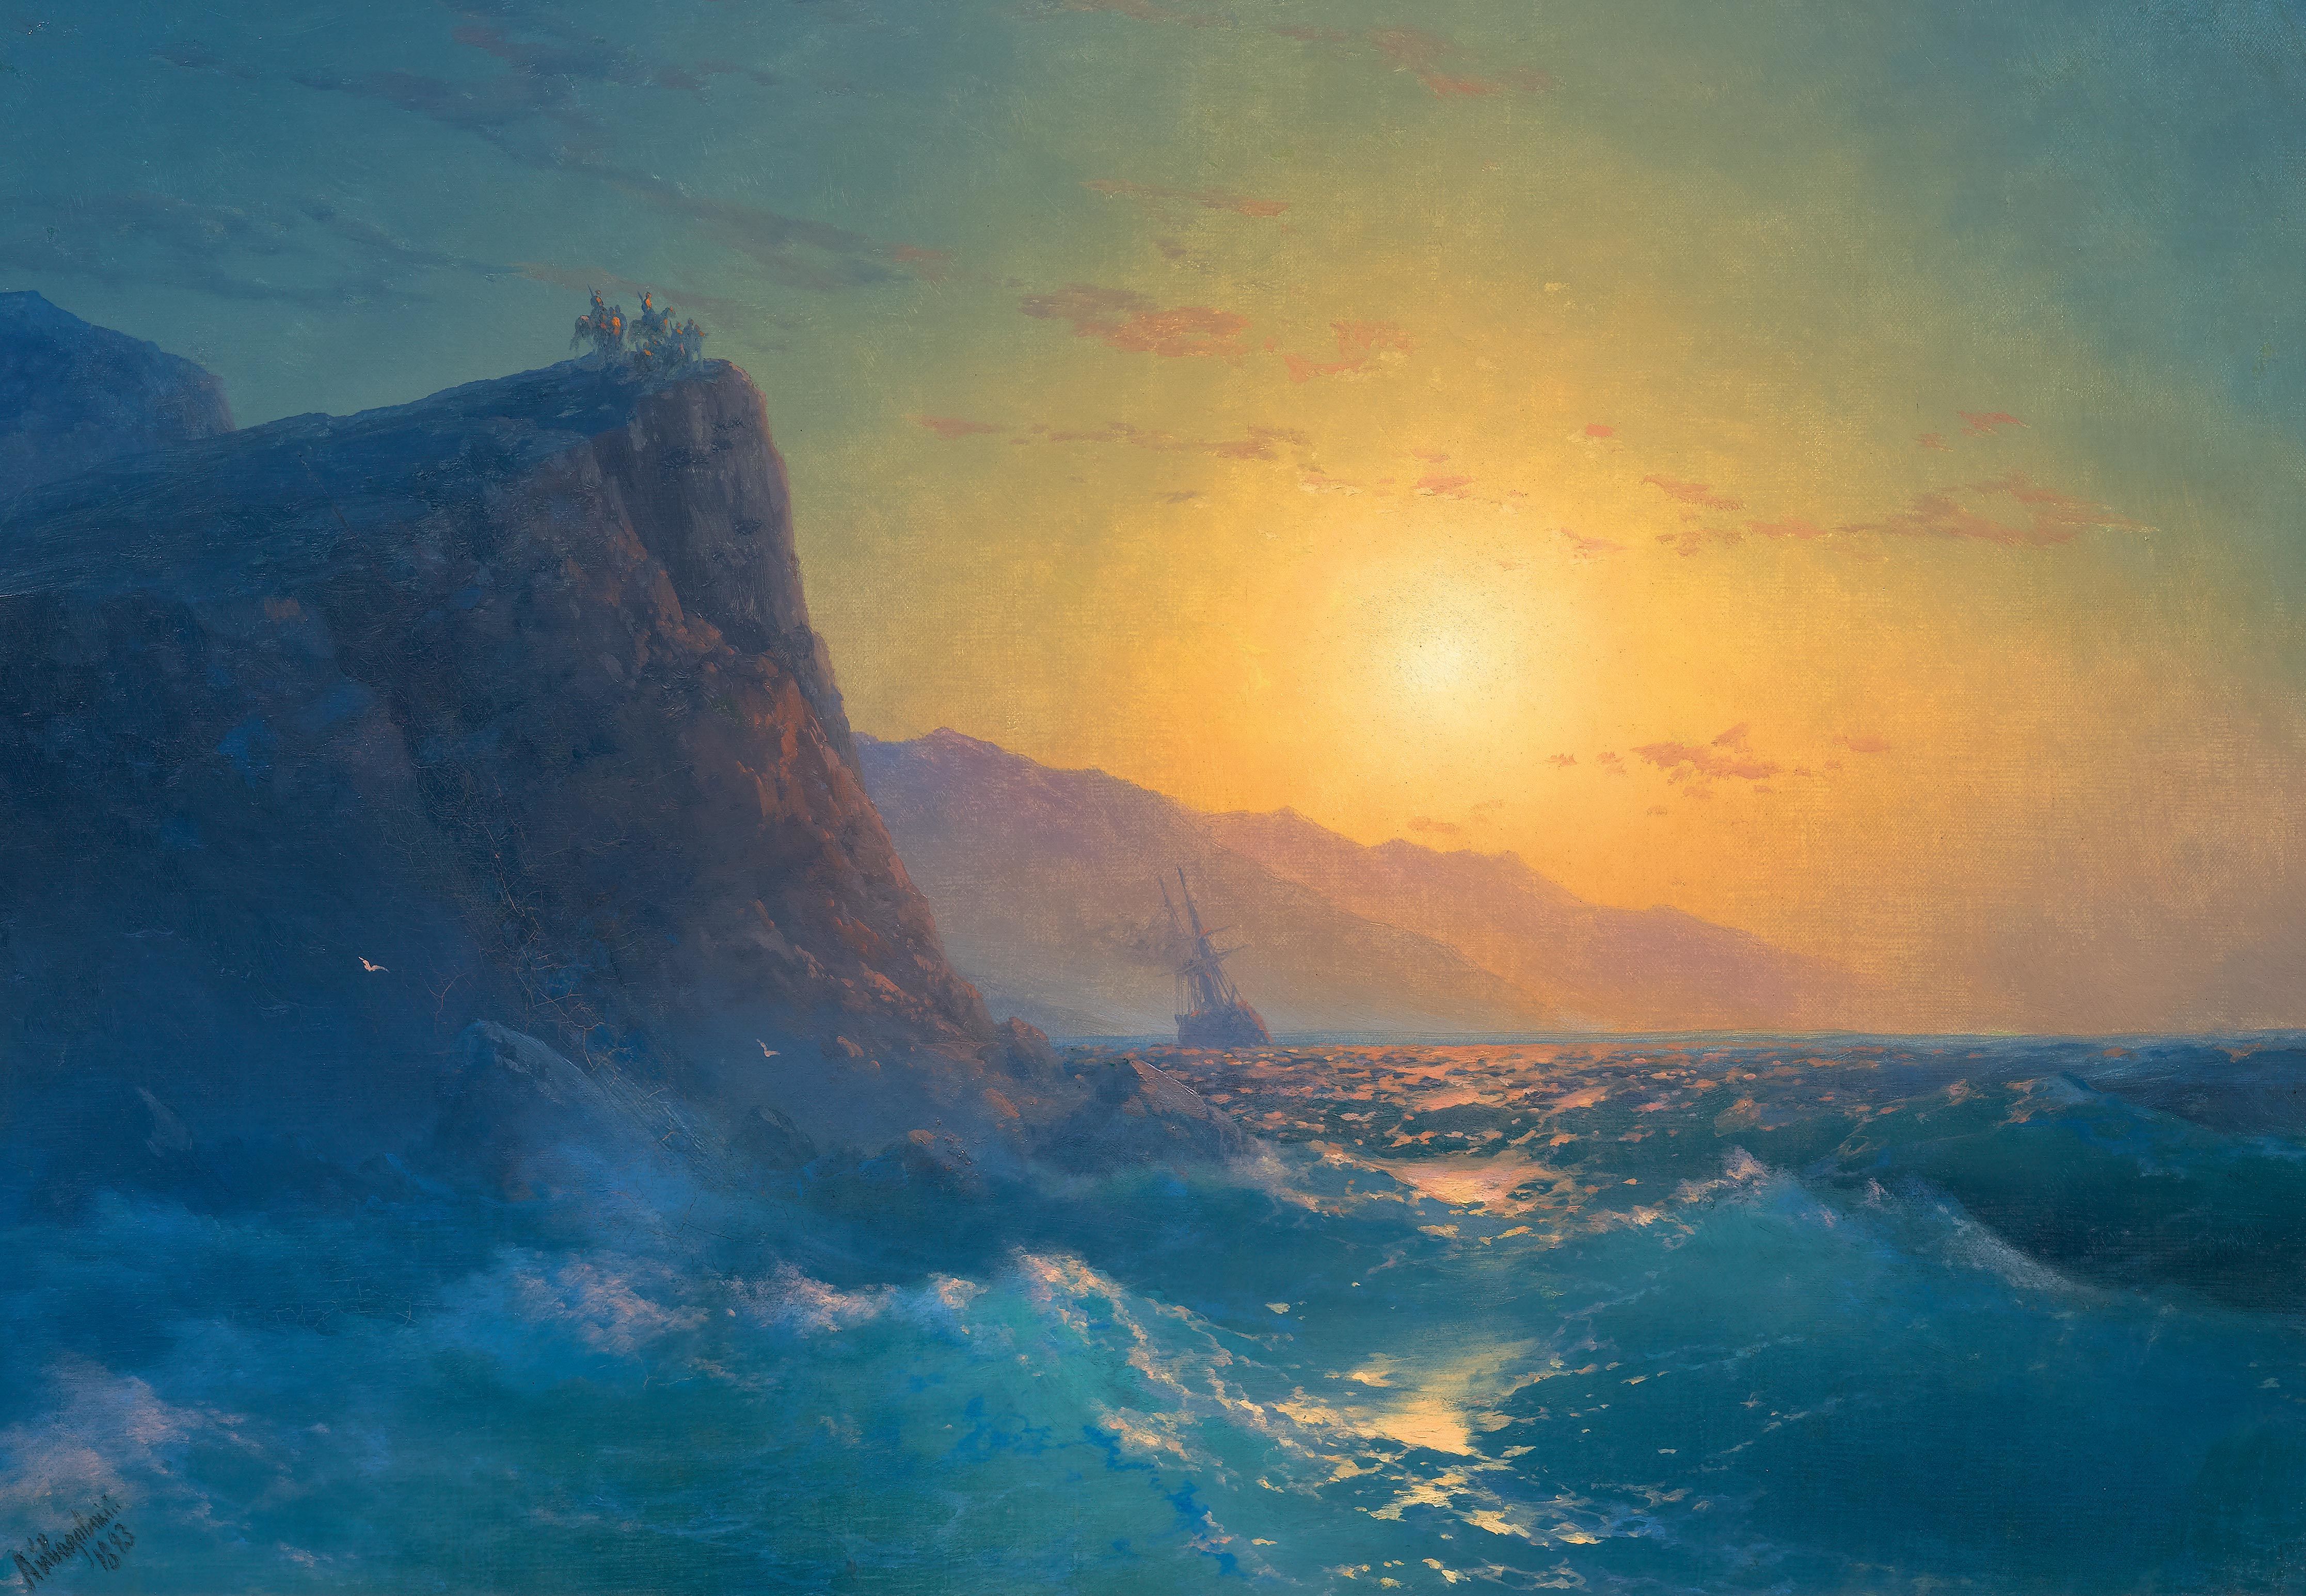 “View of a Steep, Rocky Coast and a Rough Sea at Sunset”